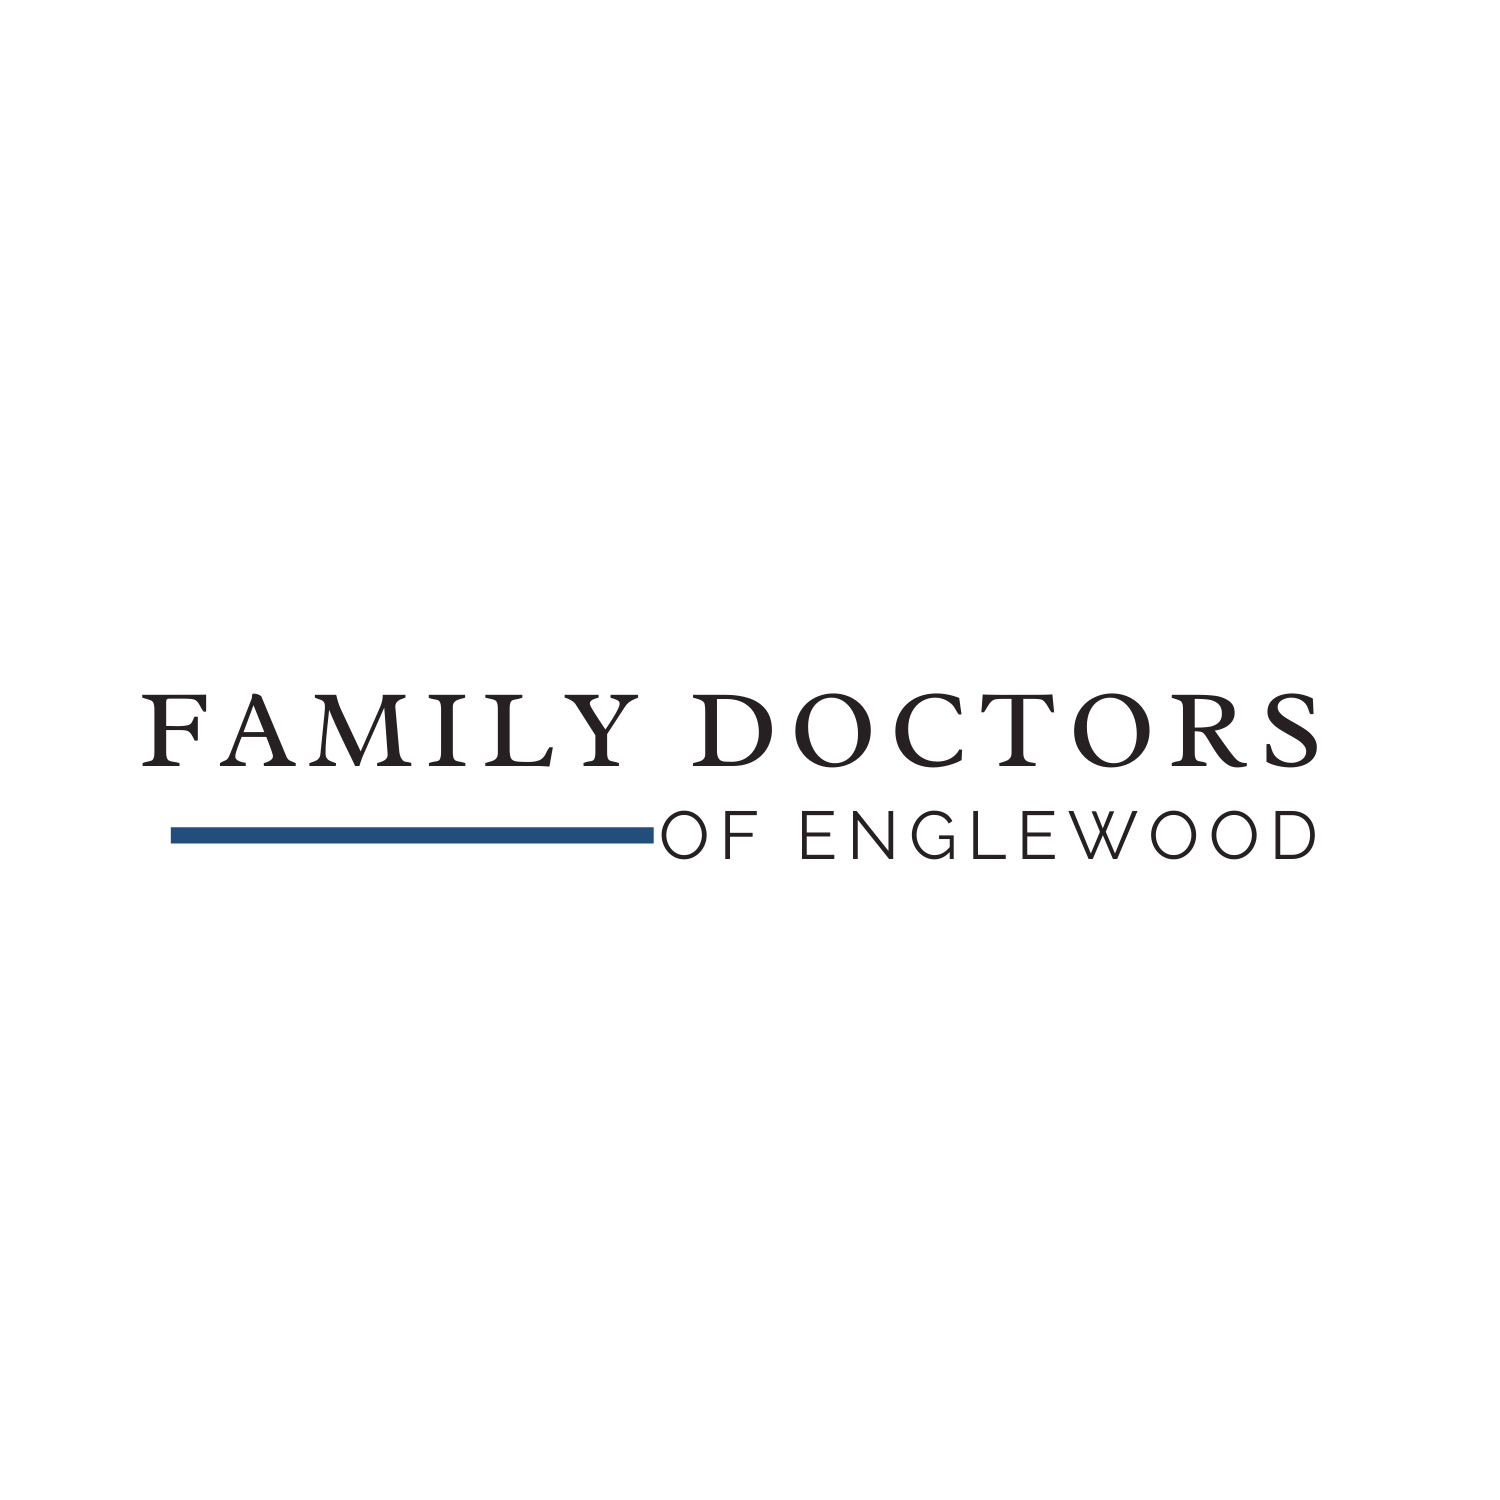 Family Doctors of Englewood - Englewood, FL 34223 - (941)205-0520 | ShowMeLocal.com